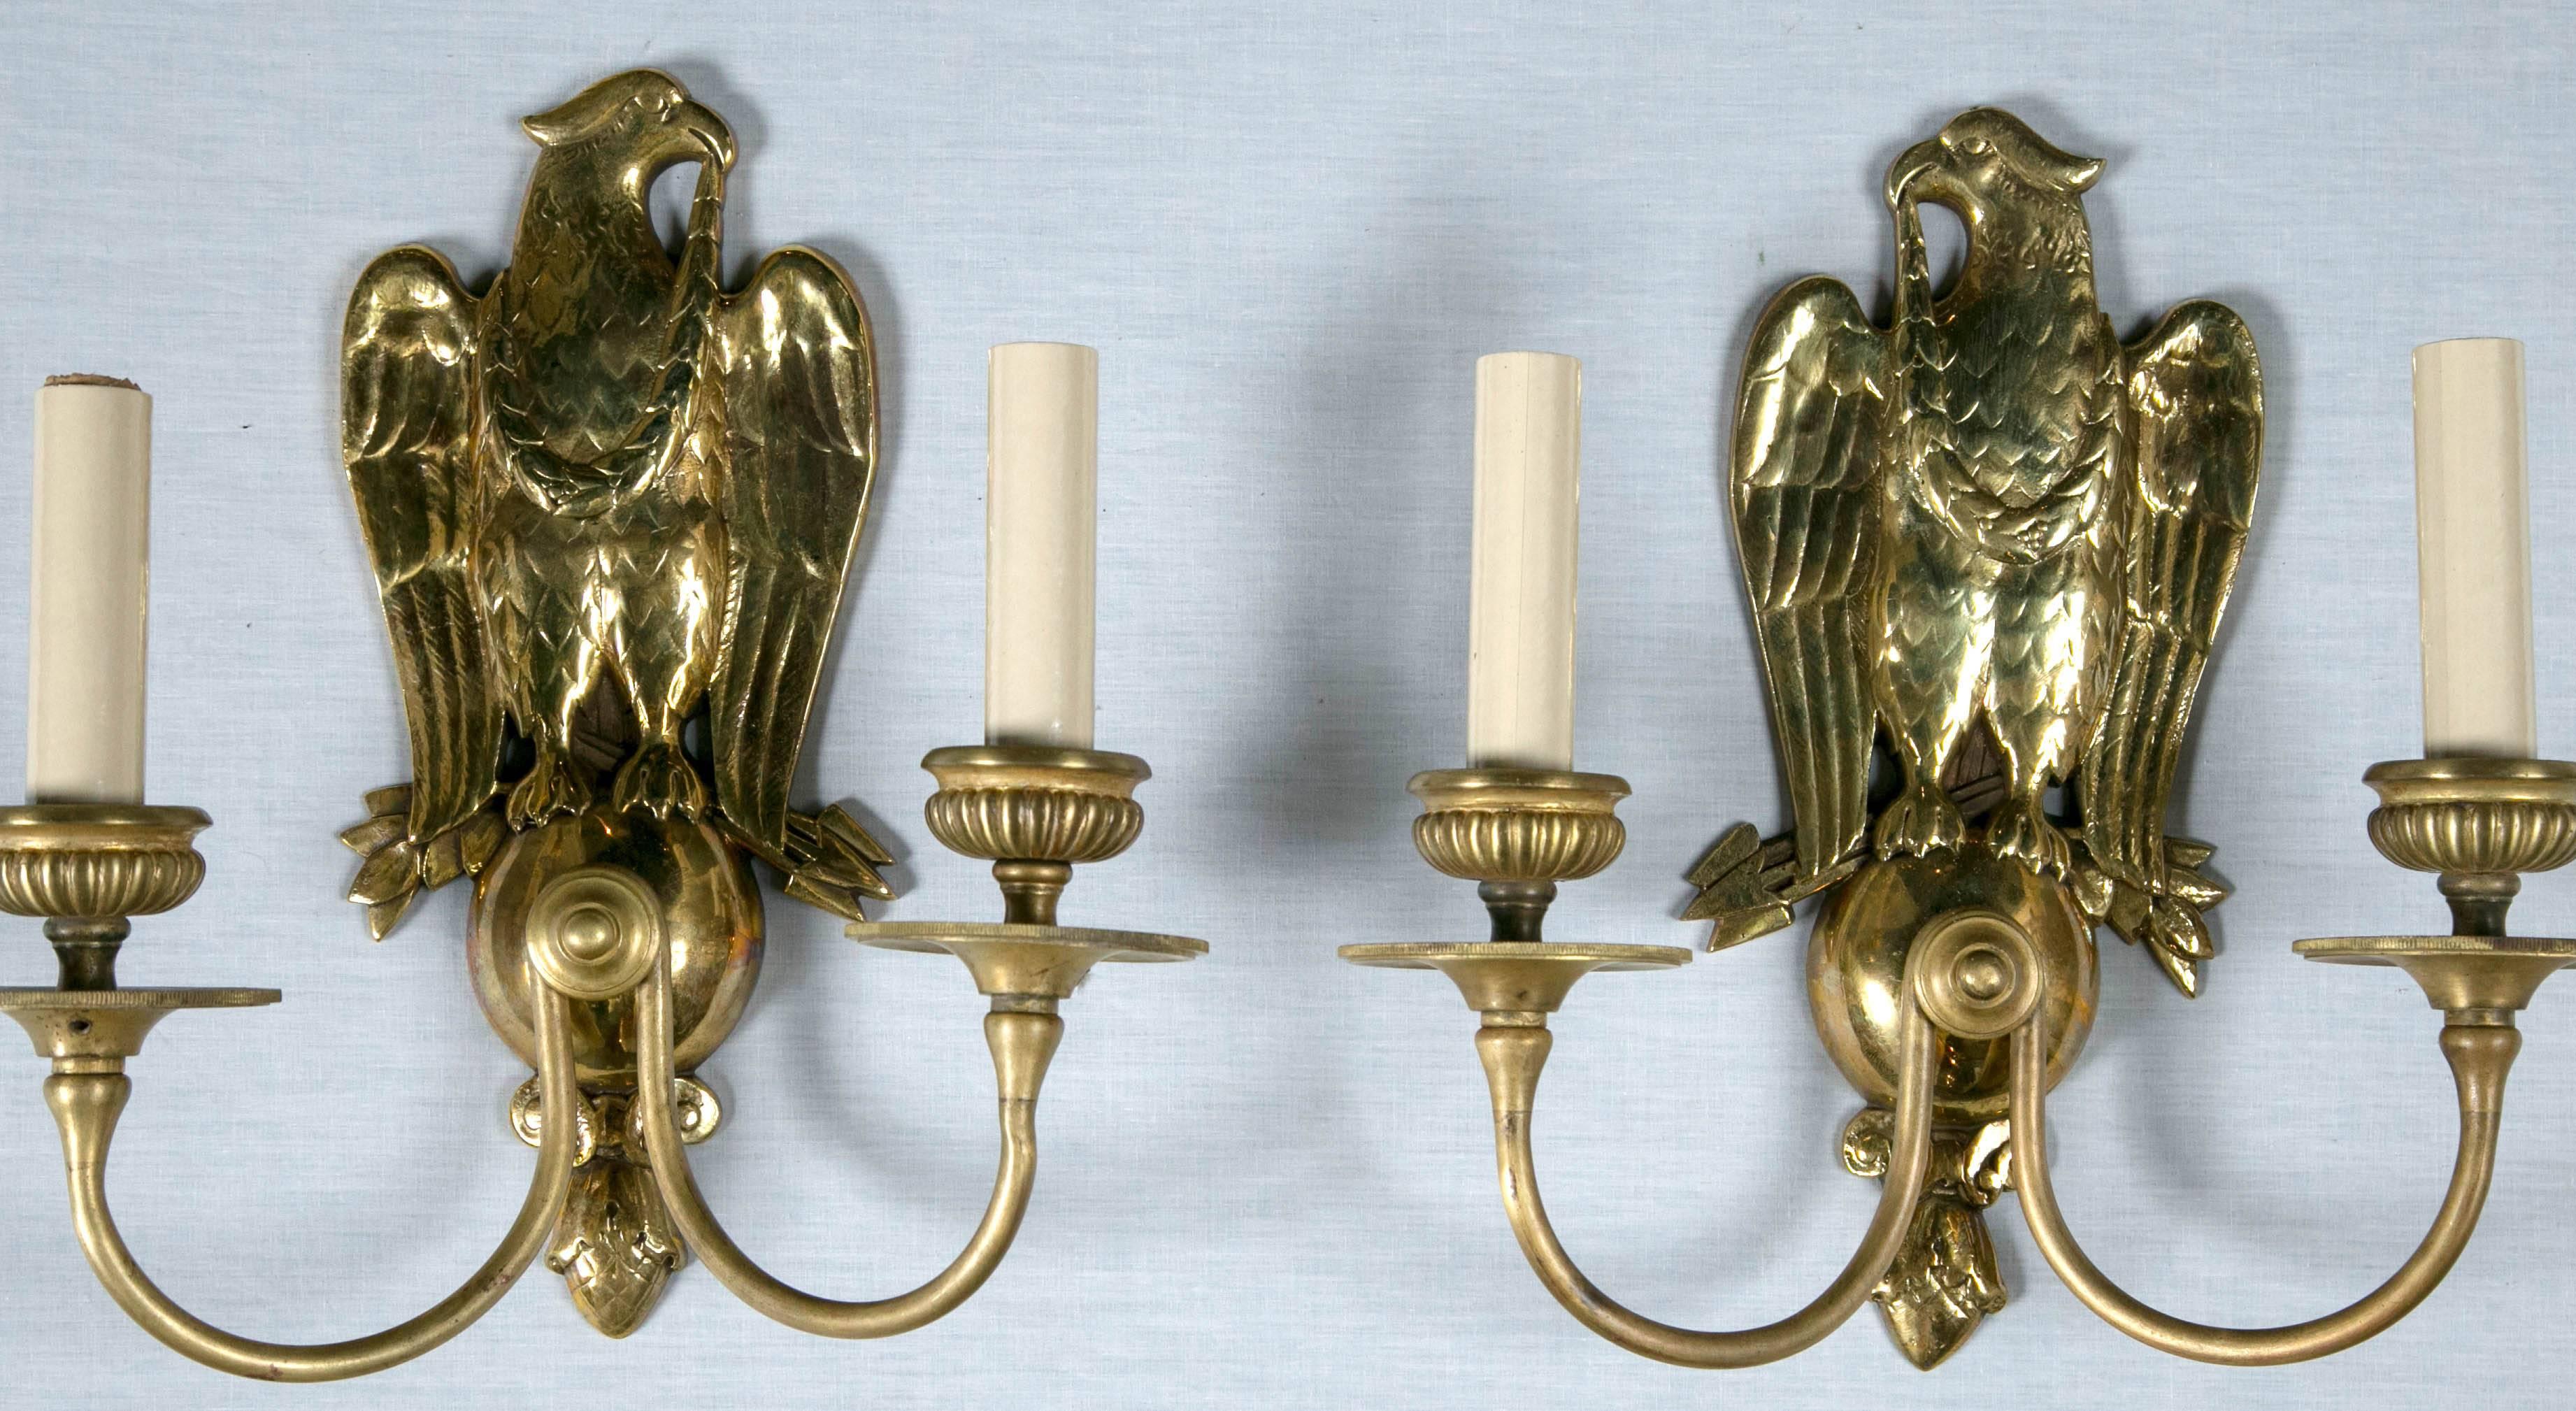 Beautiful Federal style Caldwell gilt bronze sconces with eagle backplate.
Six pair available priced per pair.